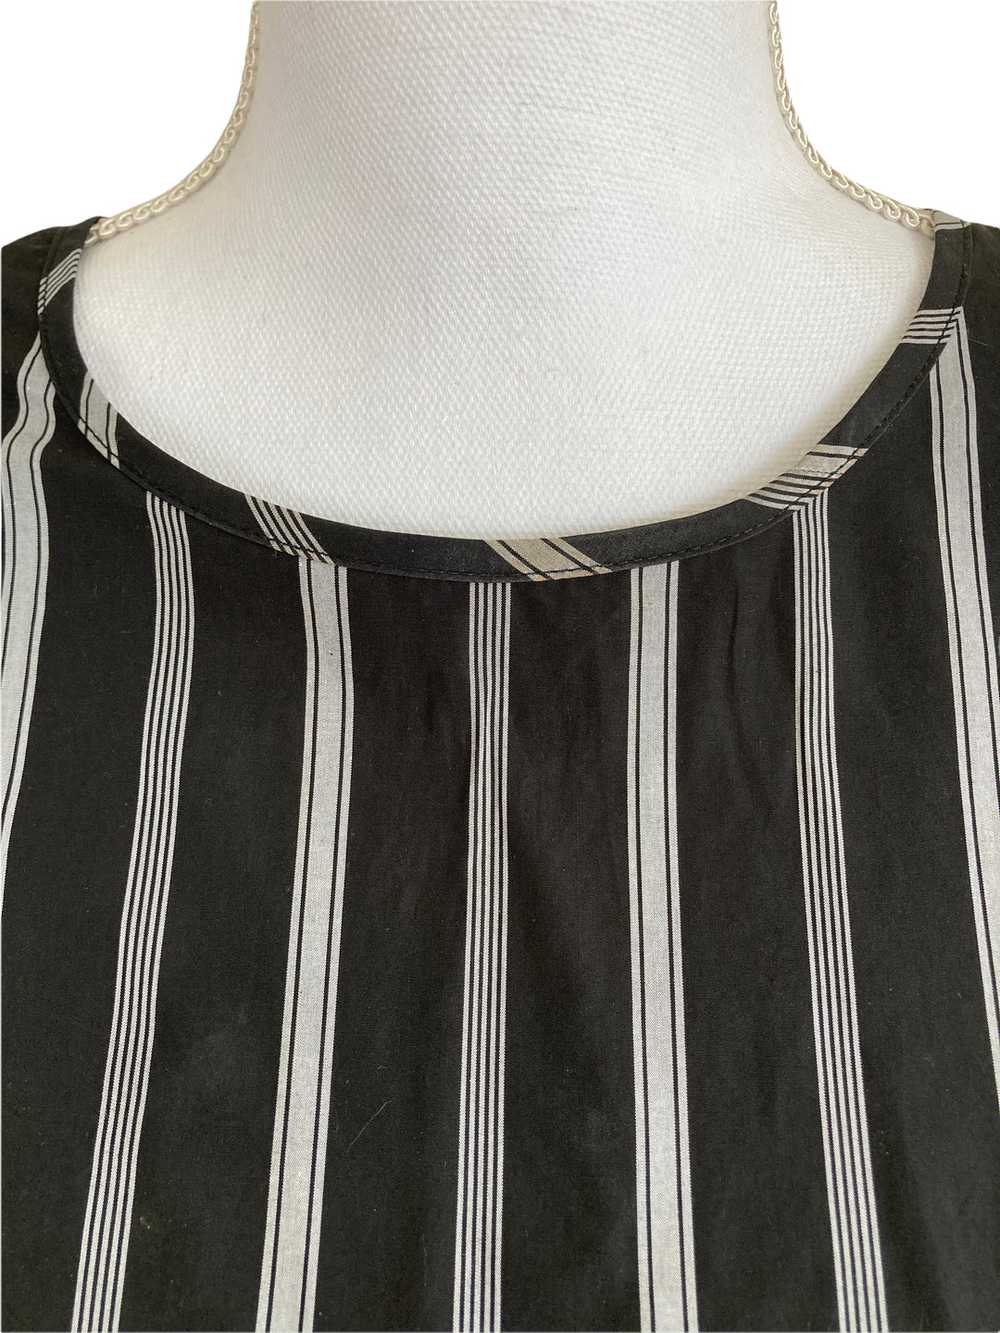 Milly Black and White Bell Sleeve Top, 8 - image 2